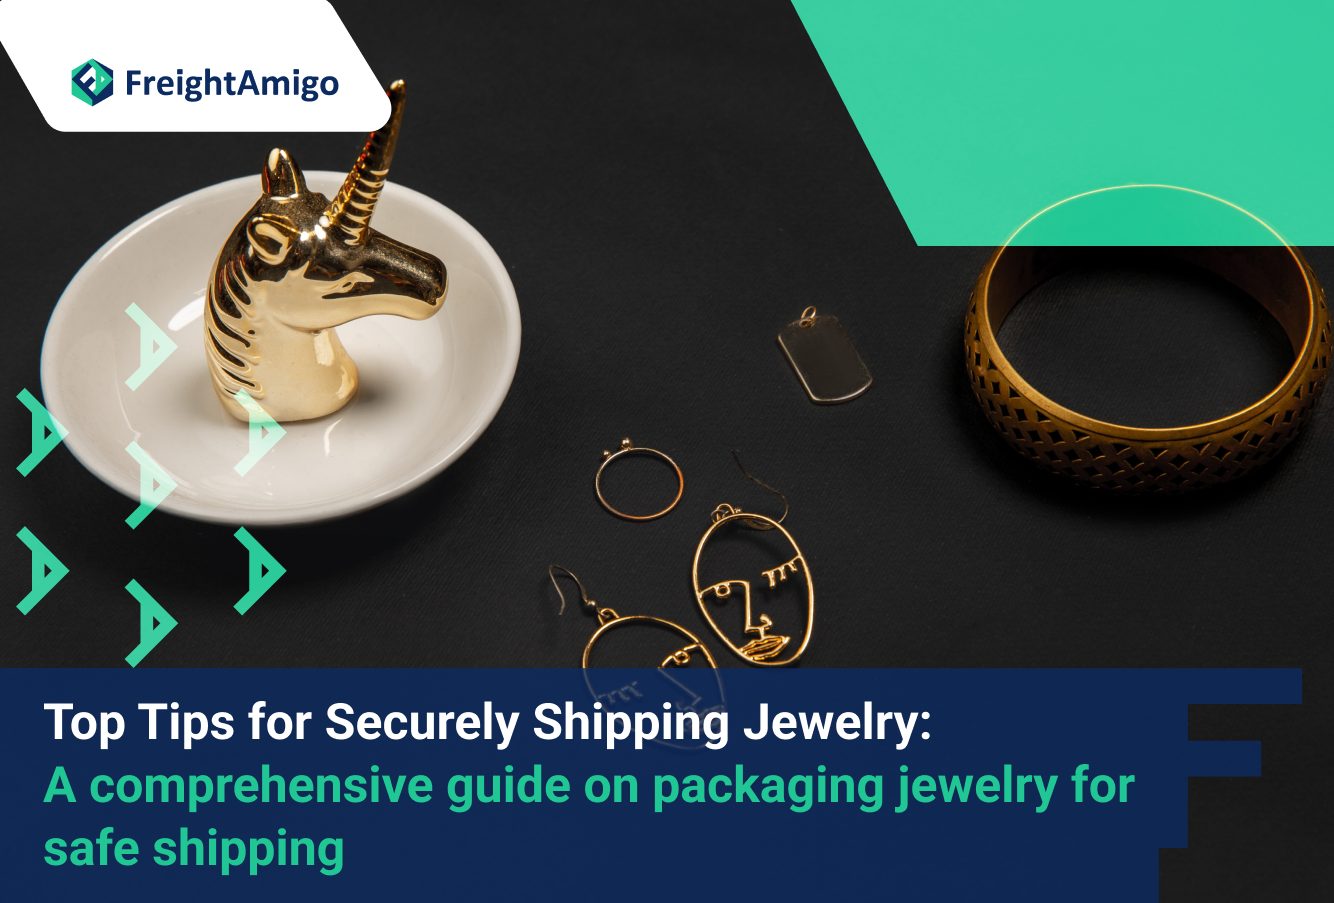 Top Tips for Securely Shipping Jewelry: A comprehensive guide on packaging jewelry for safe shipping